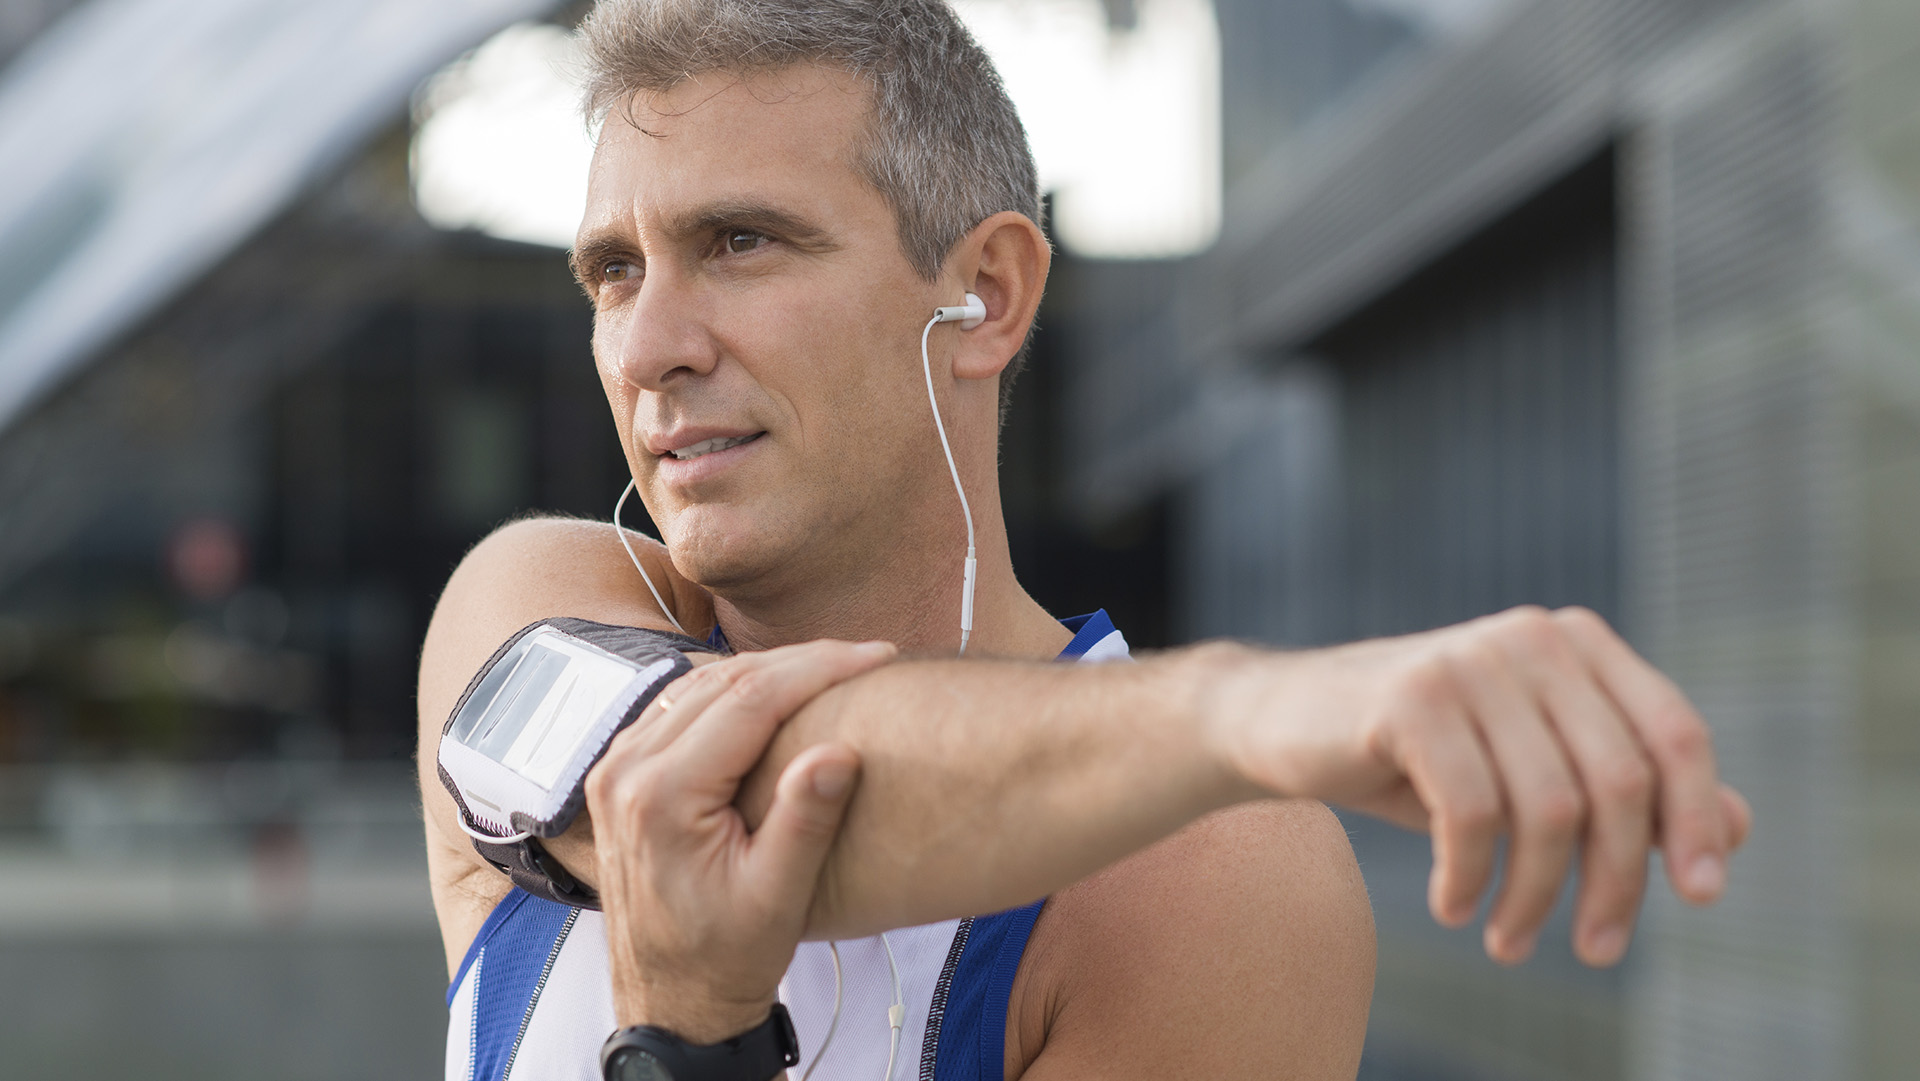 Mature Male Athlete Stretching And Listening To Music Outside